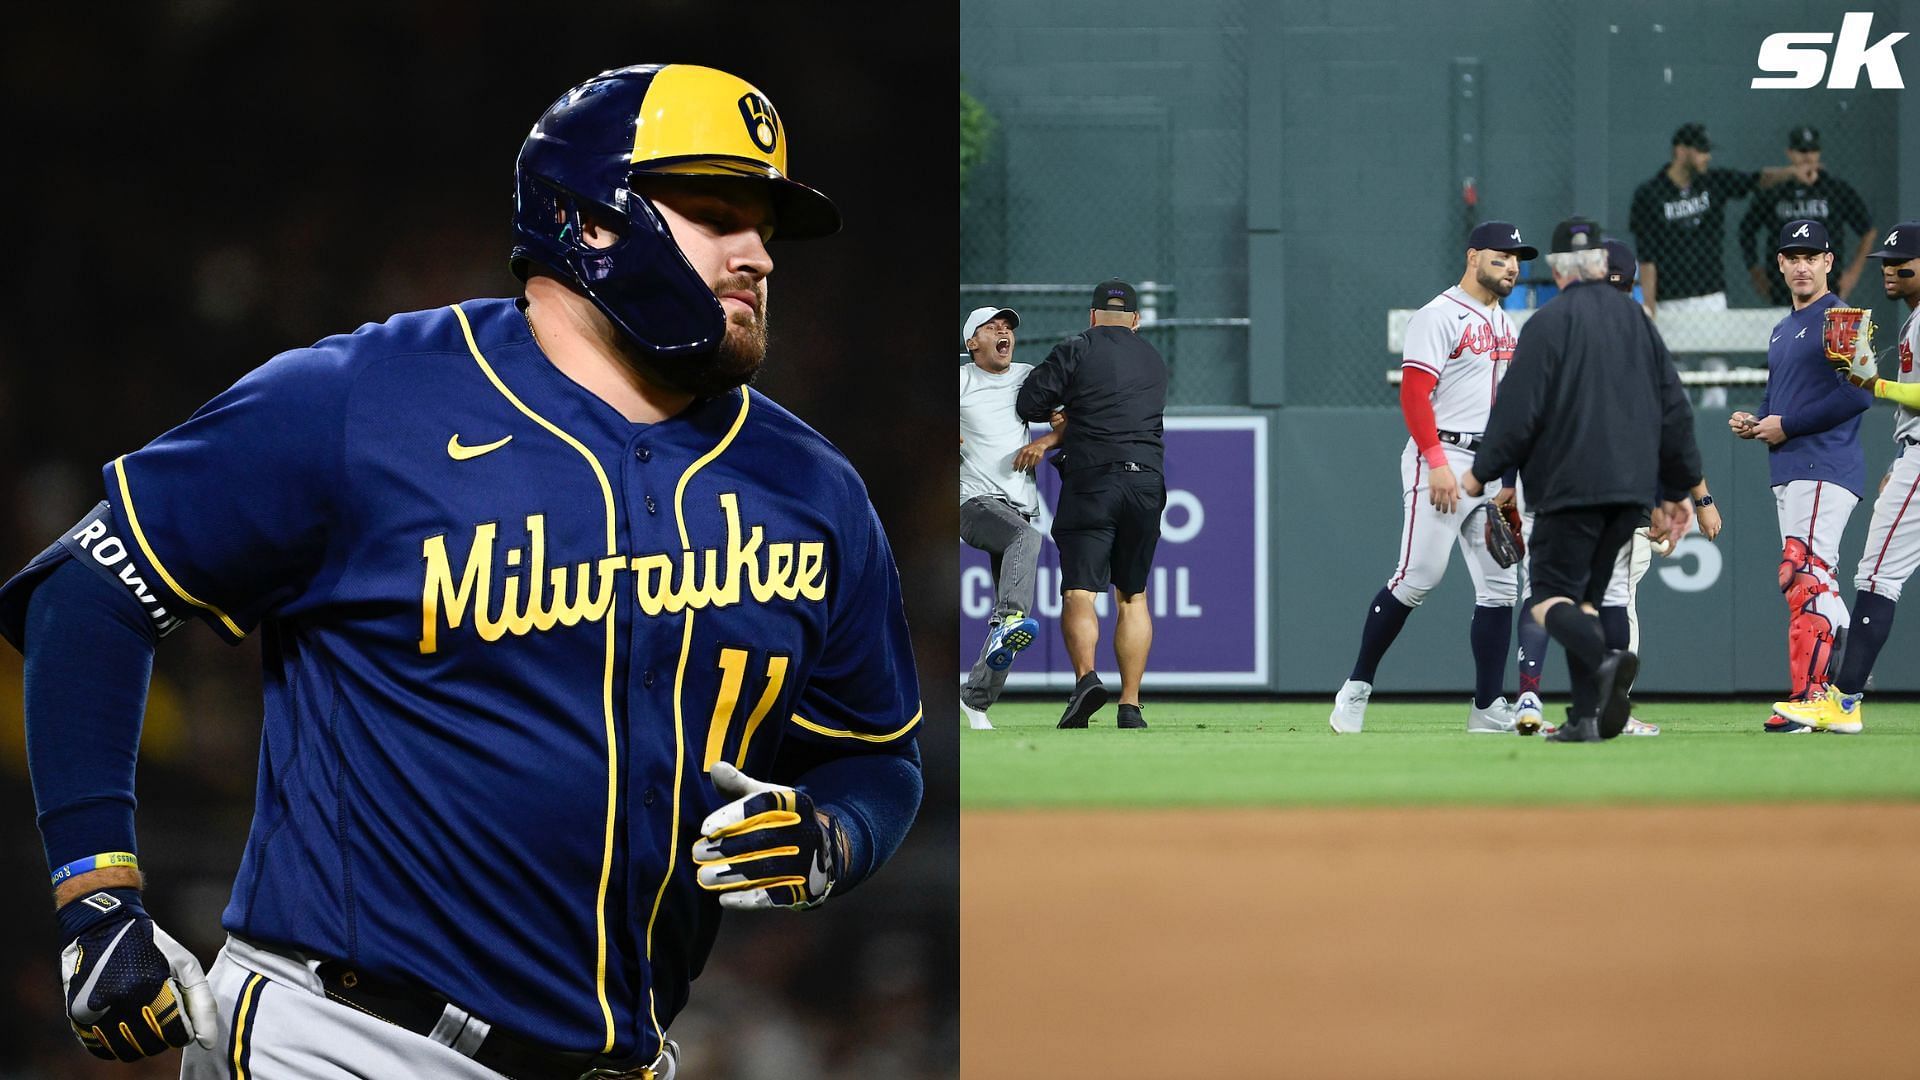 Brewers outfielder Rowdy Tellez says he would have punched fans if faced  with Ronaldo Acuña Jr. situation